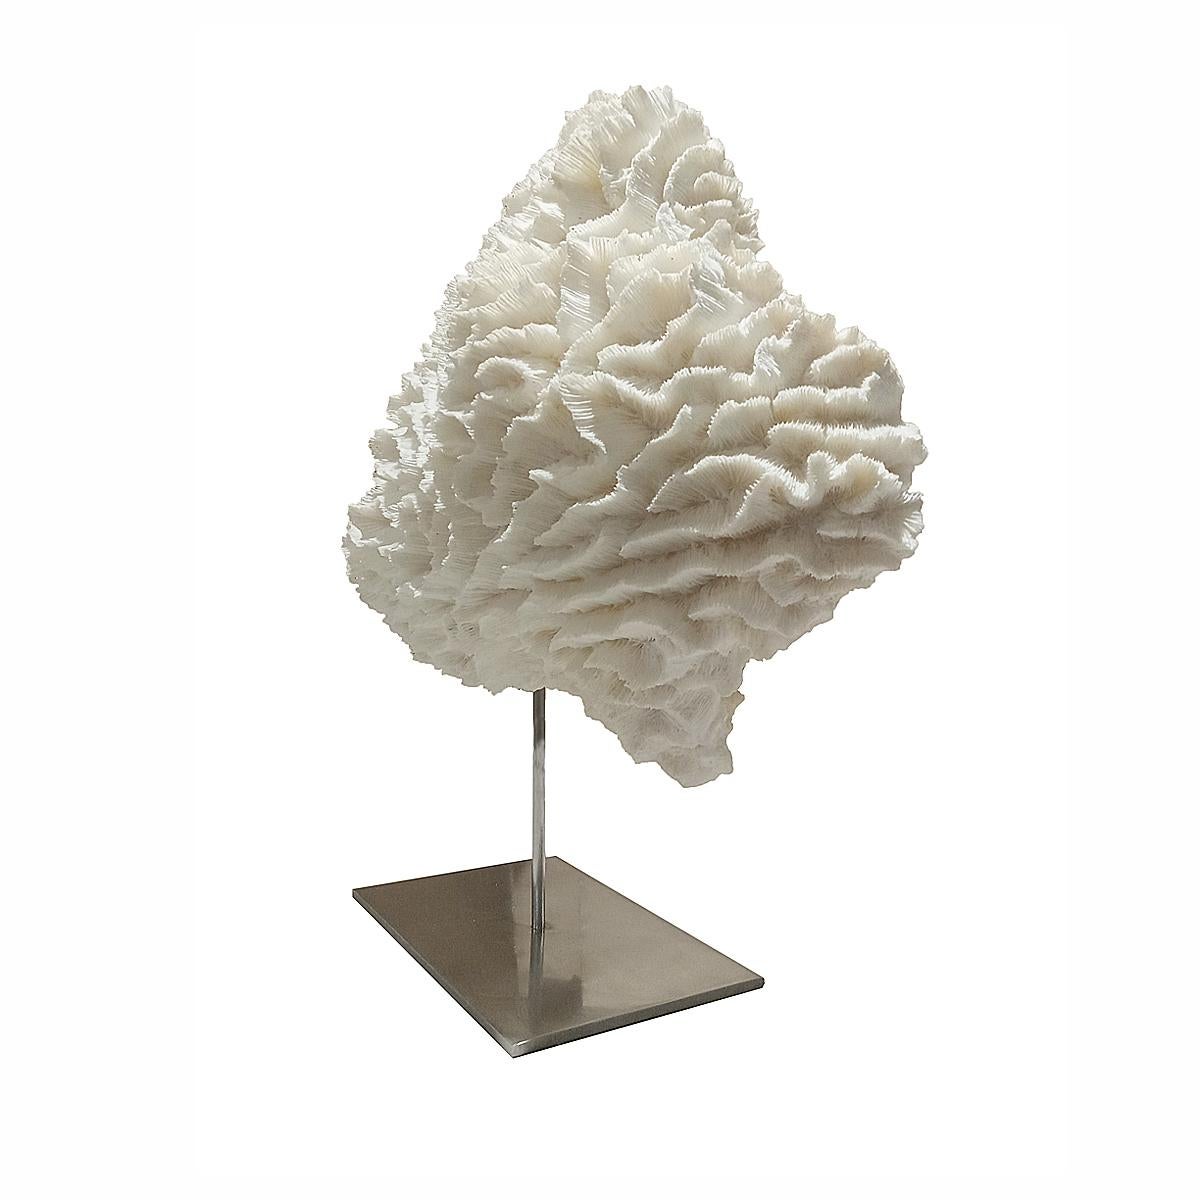 coral on a stand